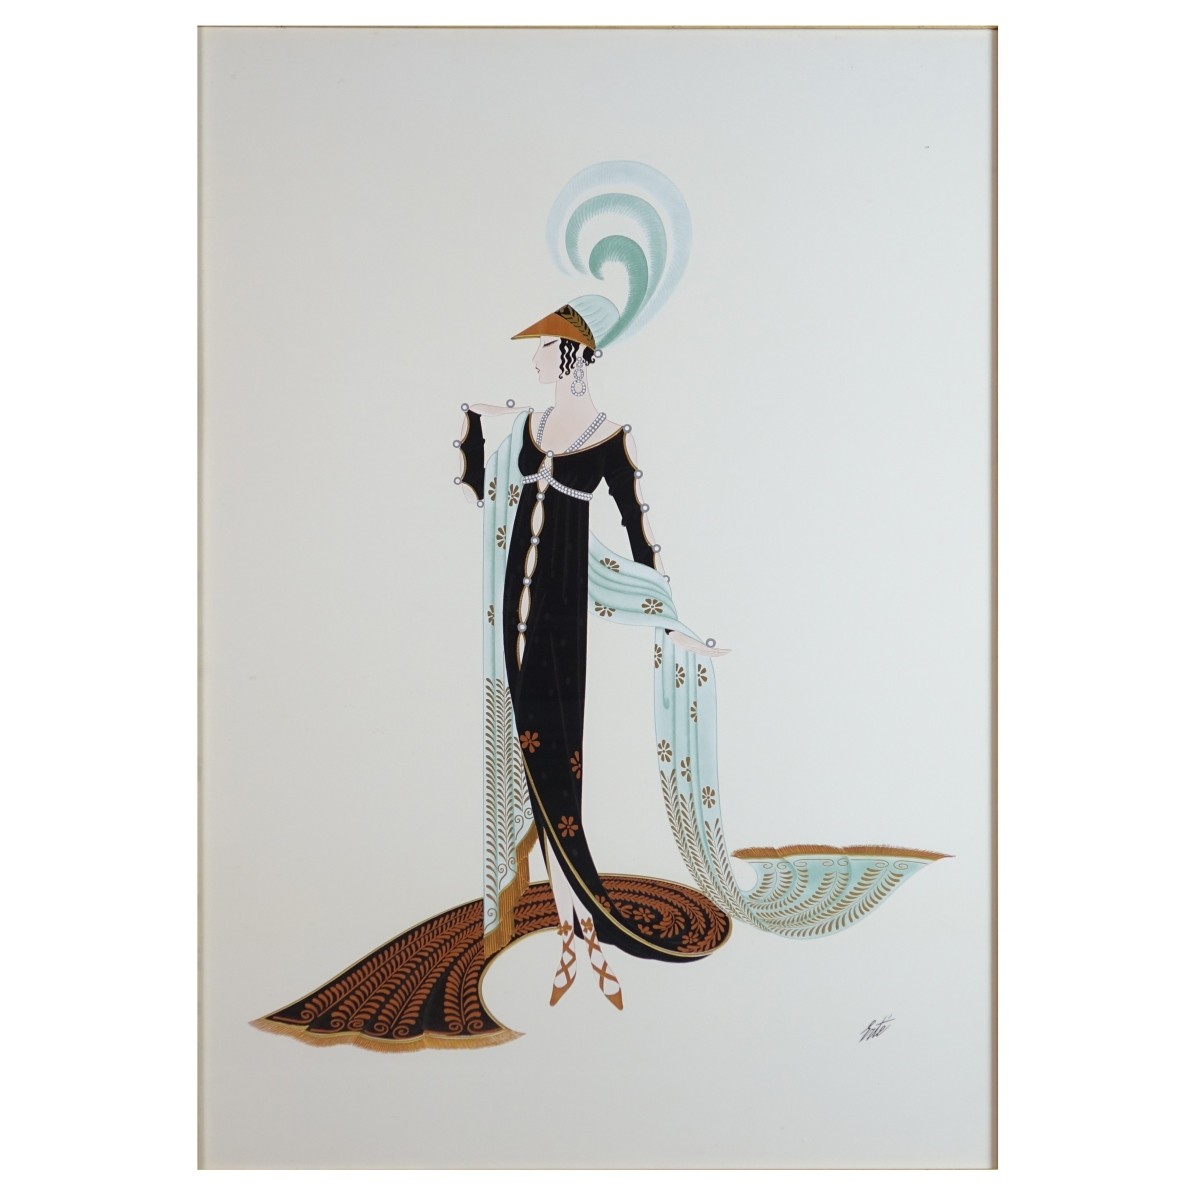 After: Erte, Russian/French (1892 - 1990)